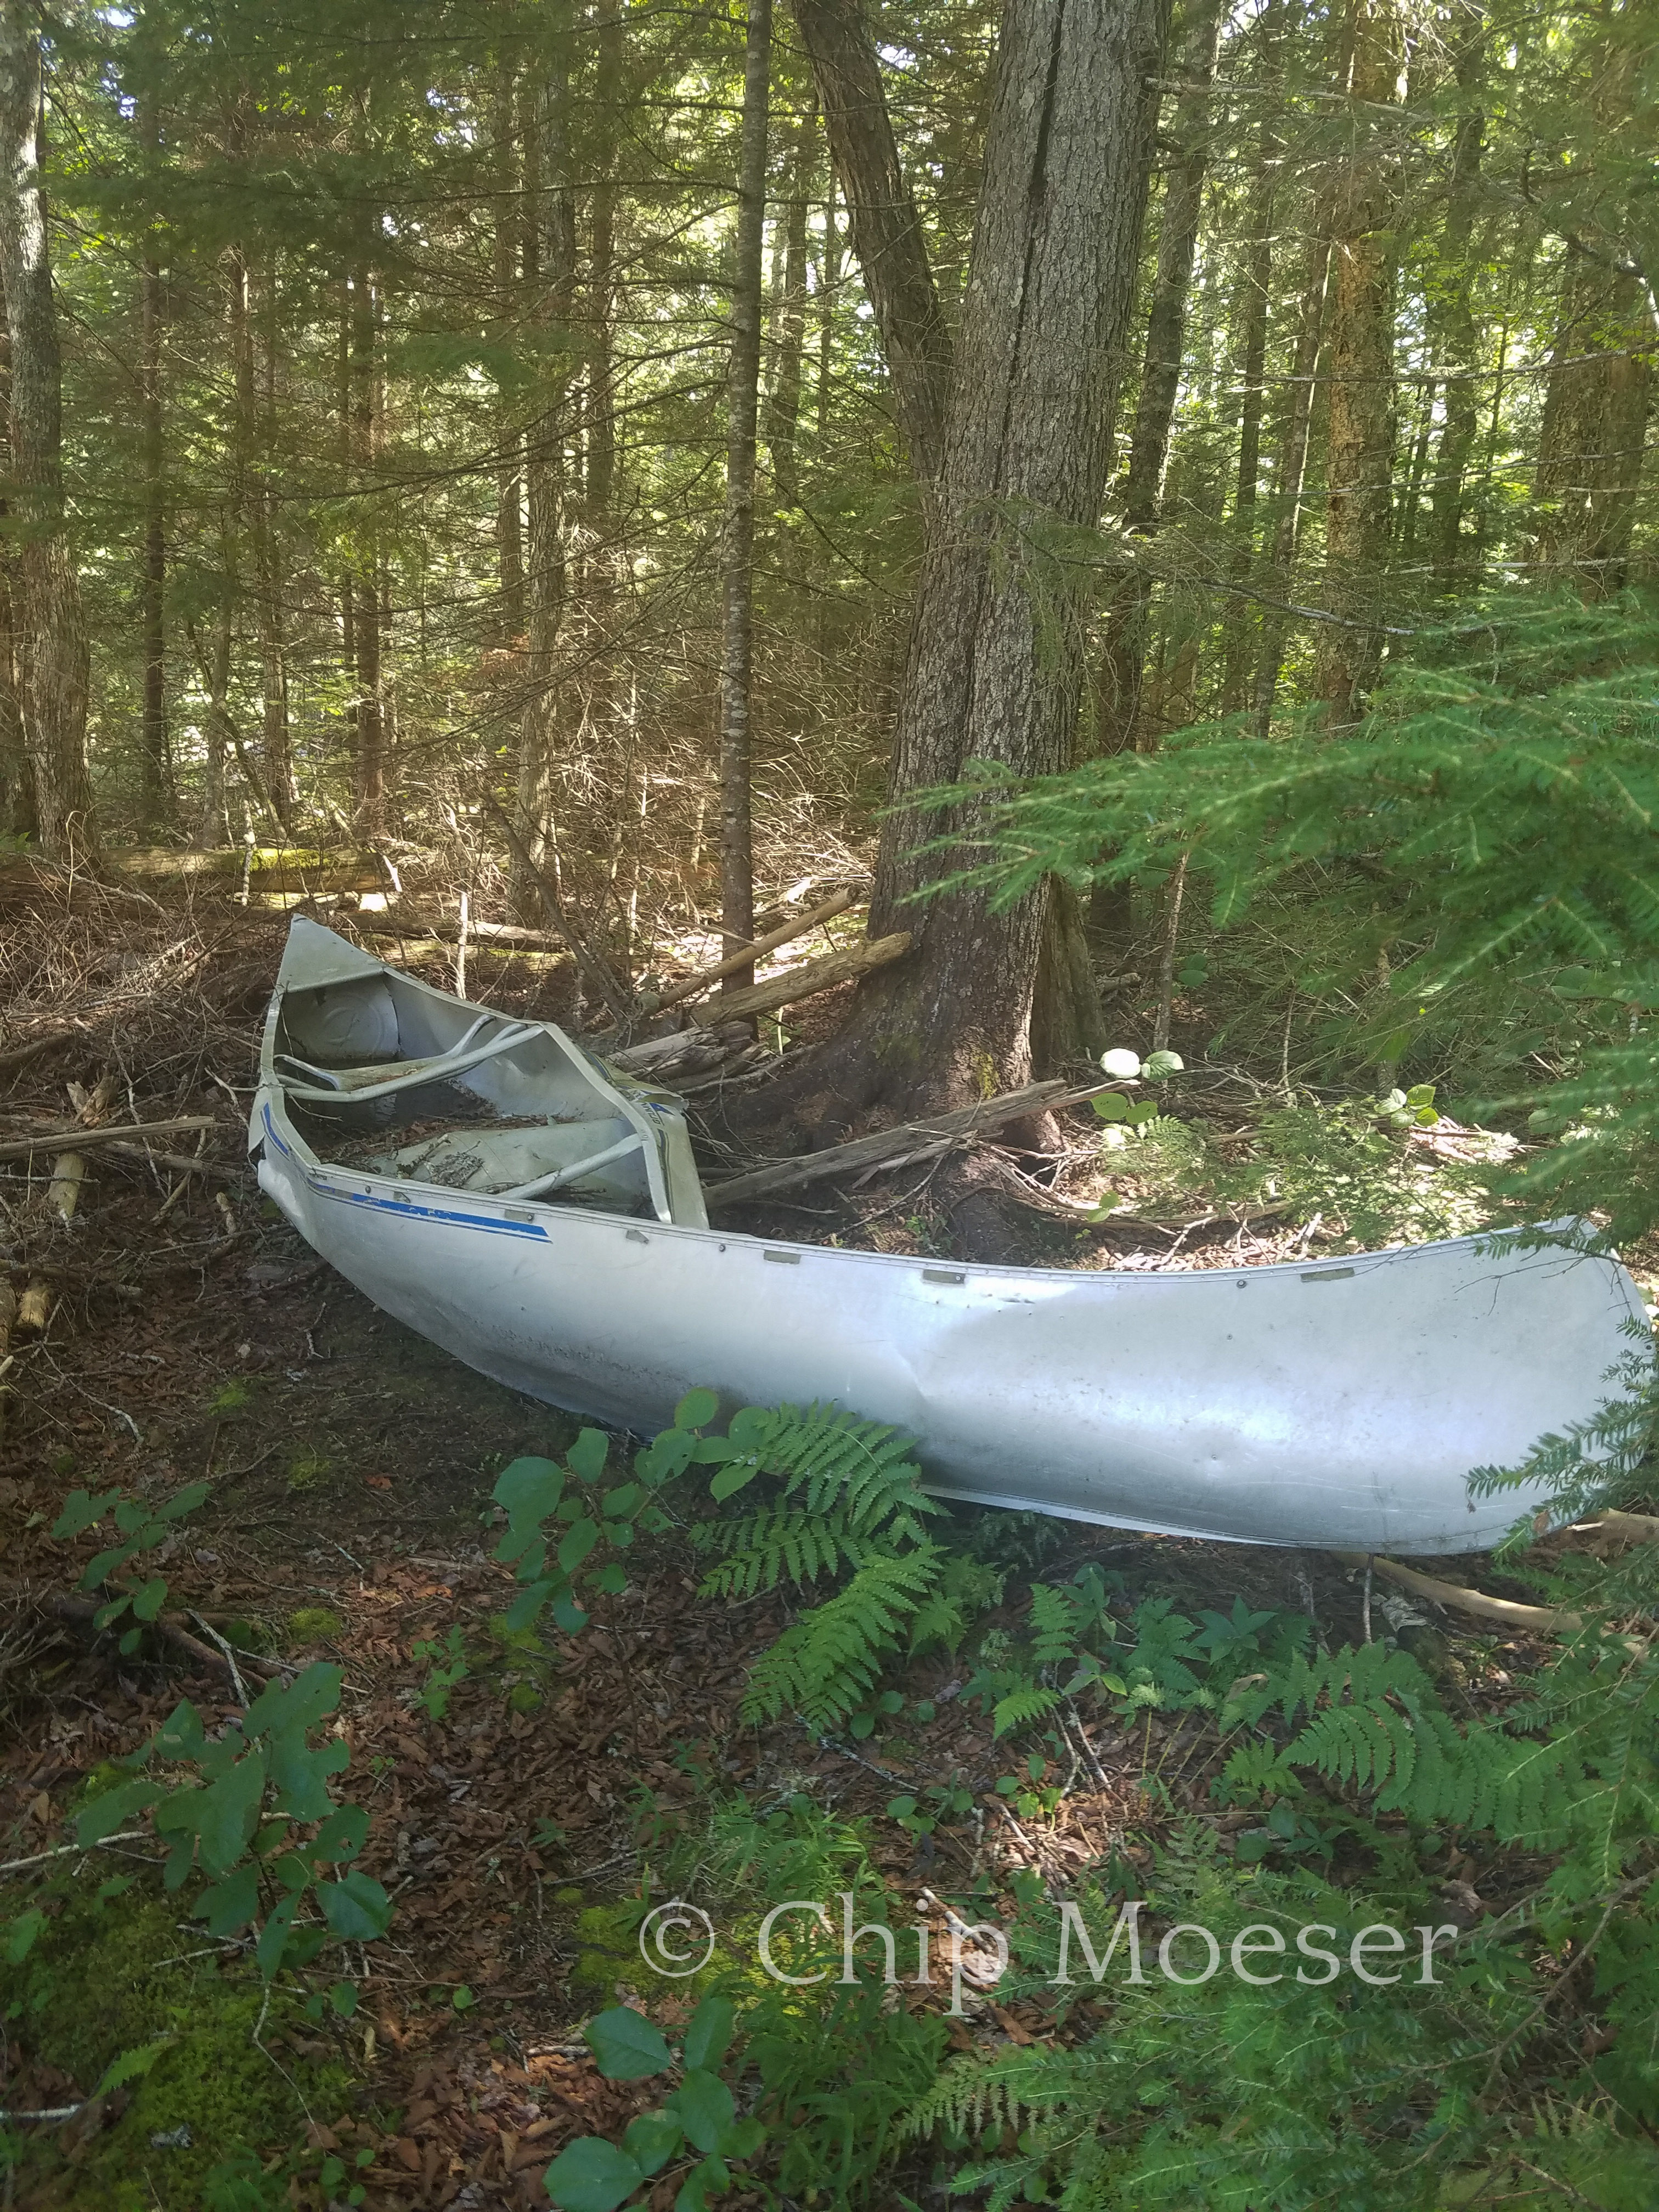 Someone's canoe trip didn't end as planned